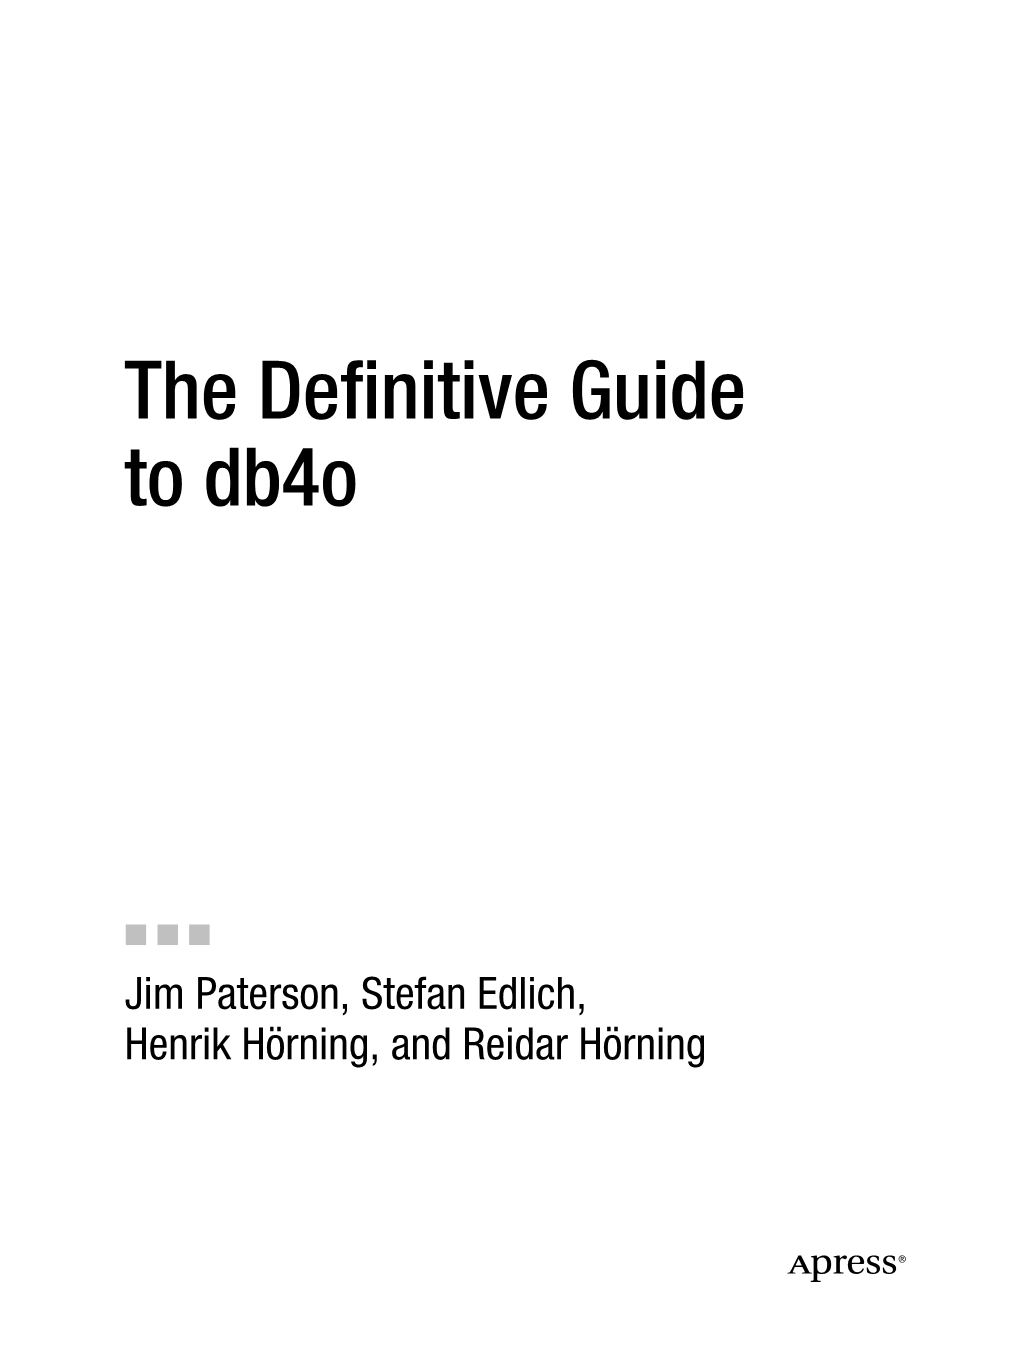 The Definitive Guide to Db4o